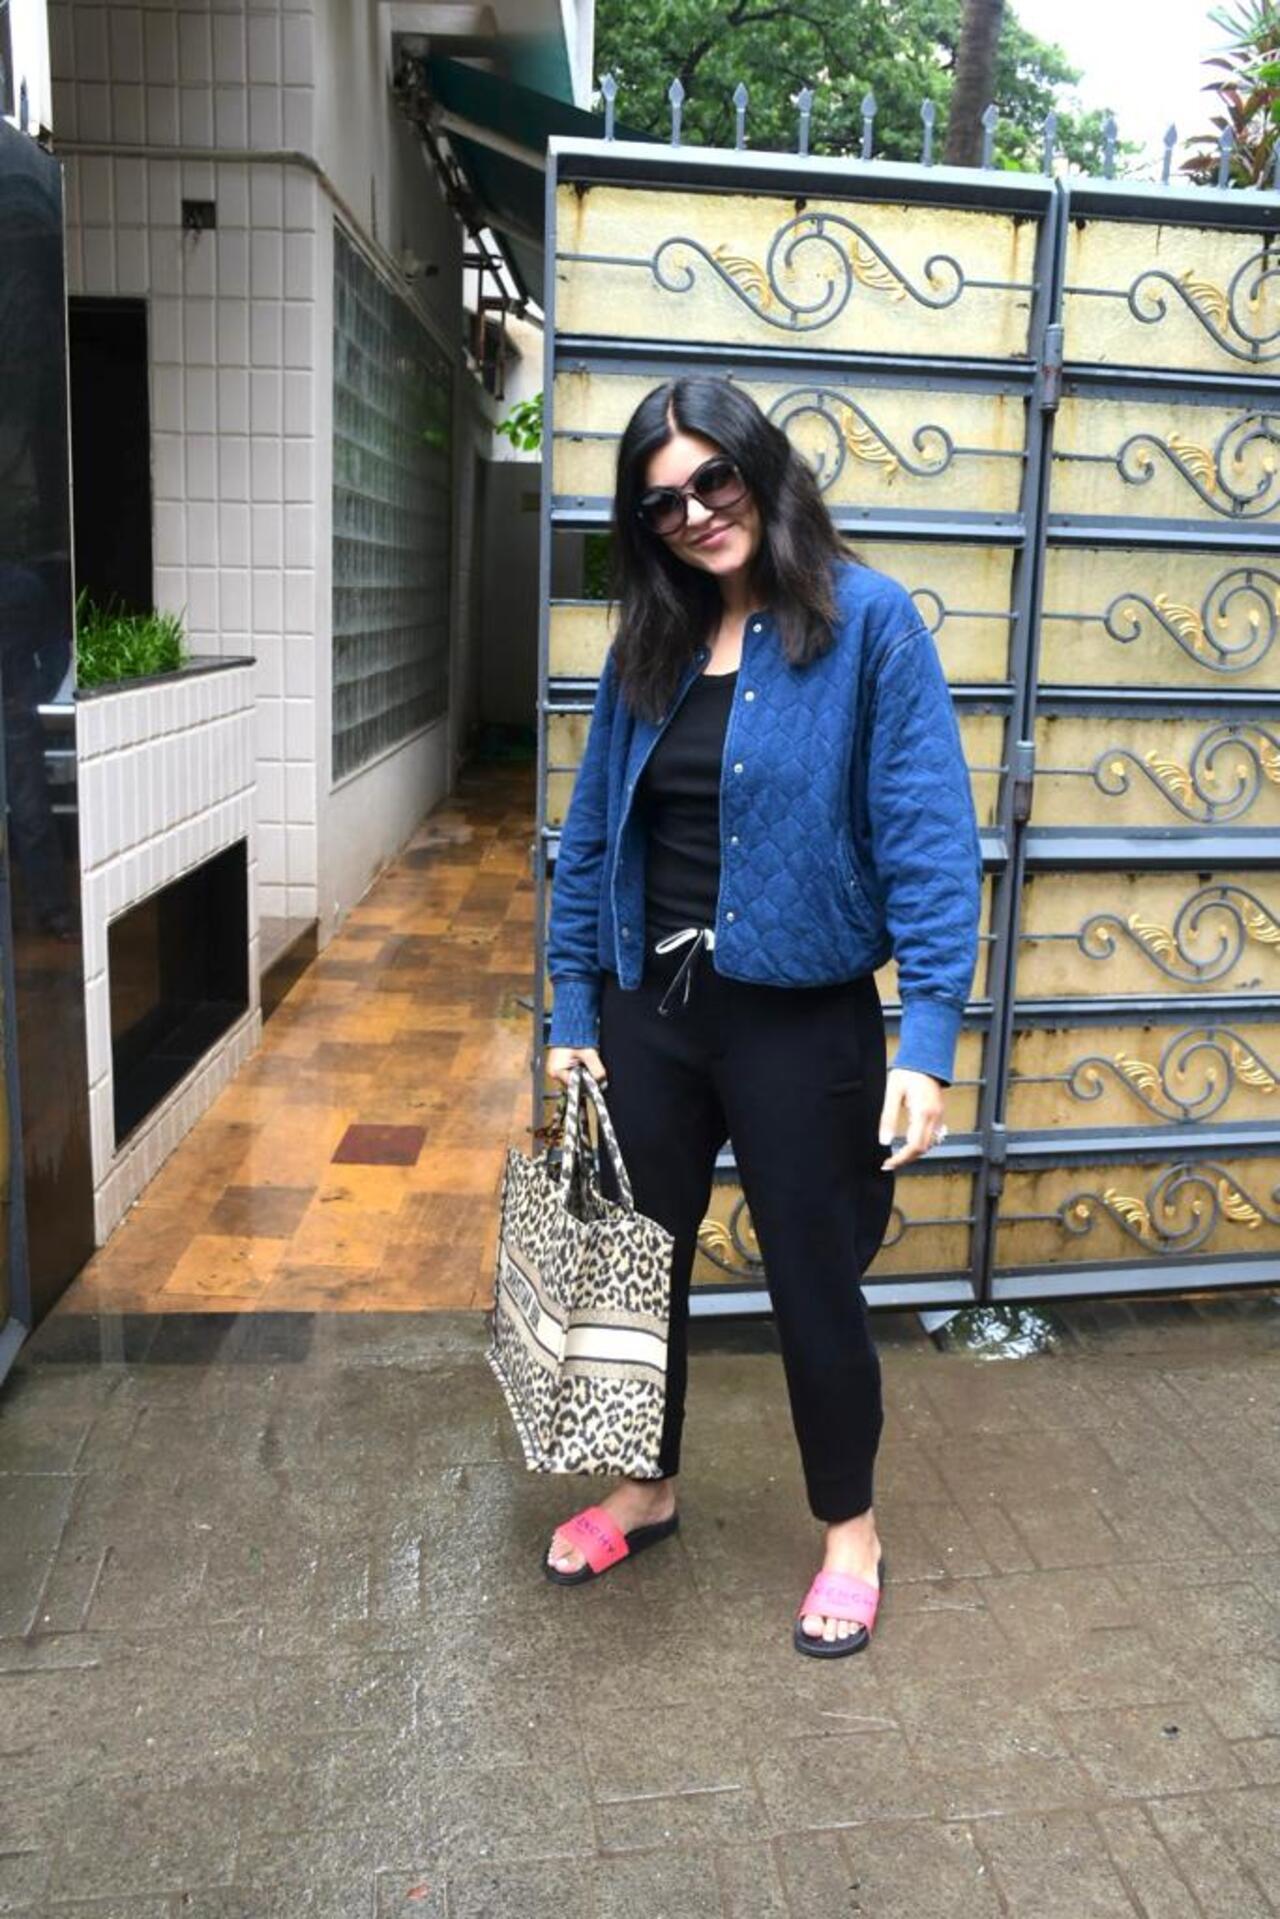 Sushmita Sen kept it simple and casual as she stepped out